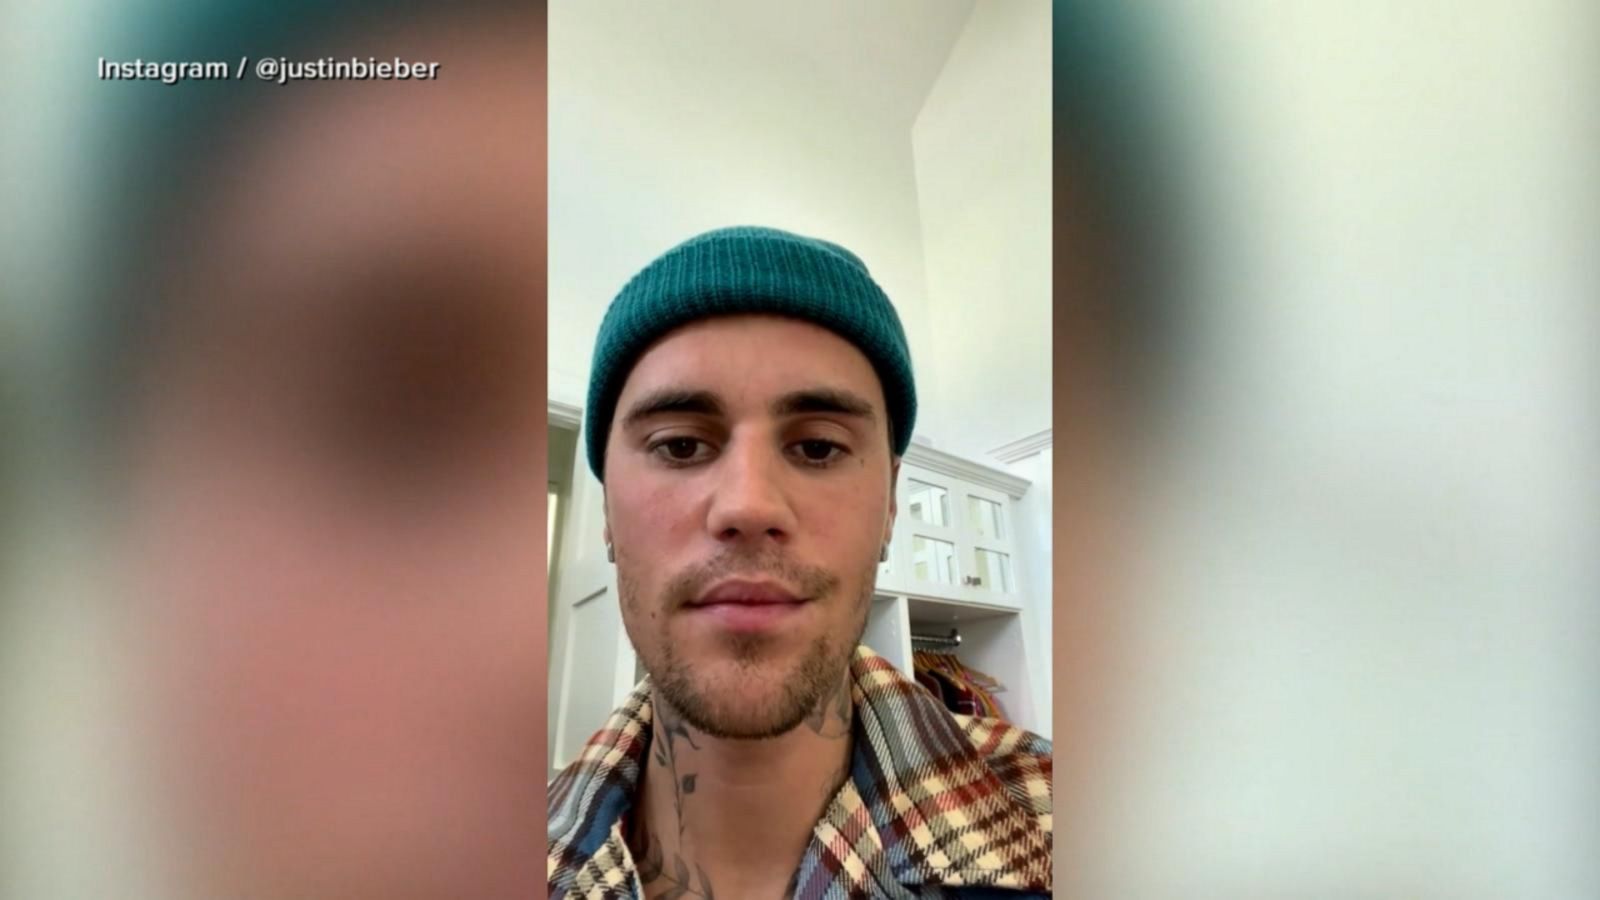 VIDEO: Justin Bieber reveals his face is partially paralyzed